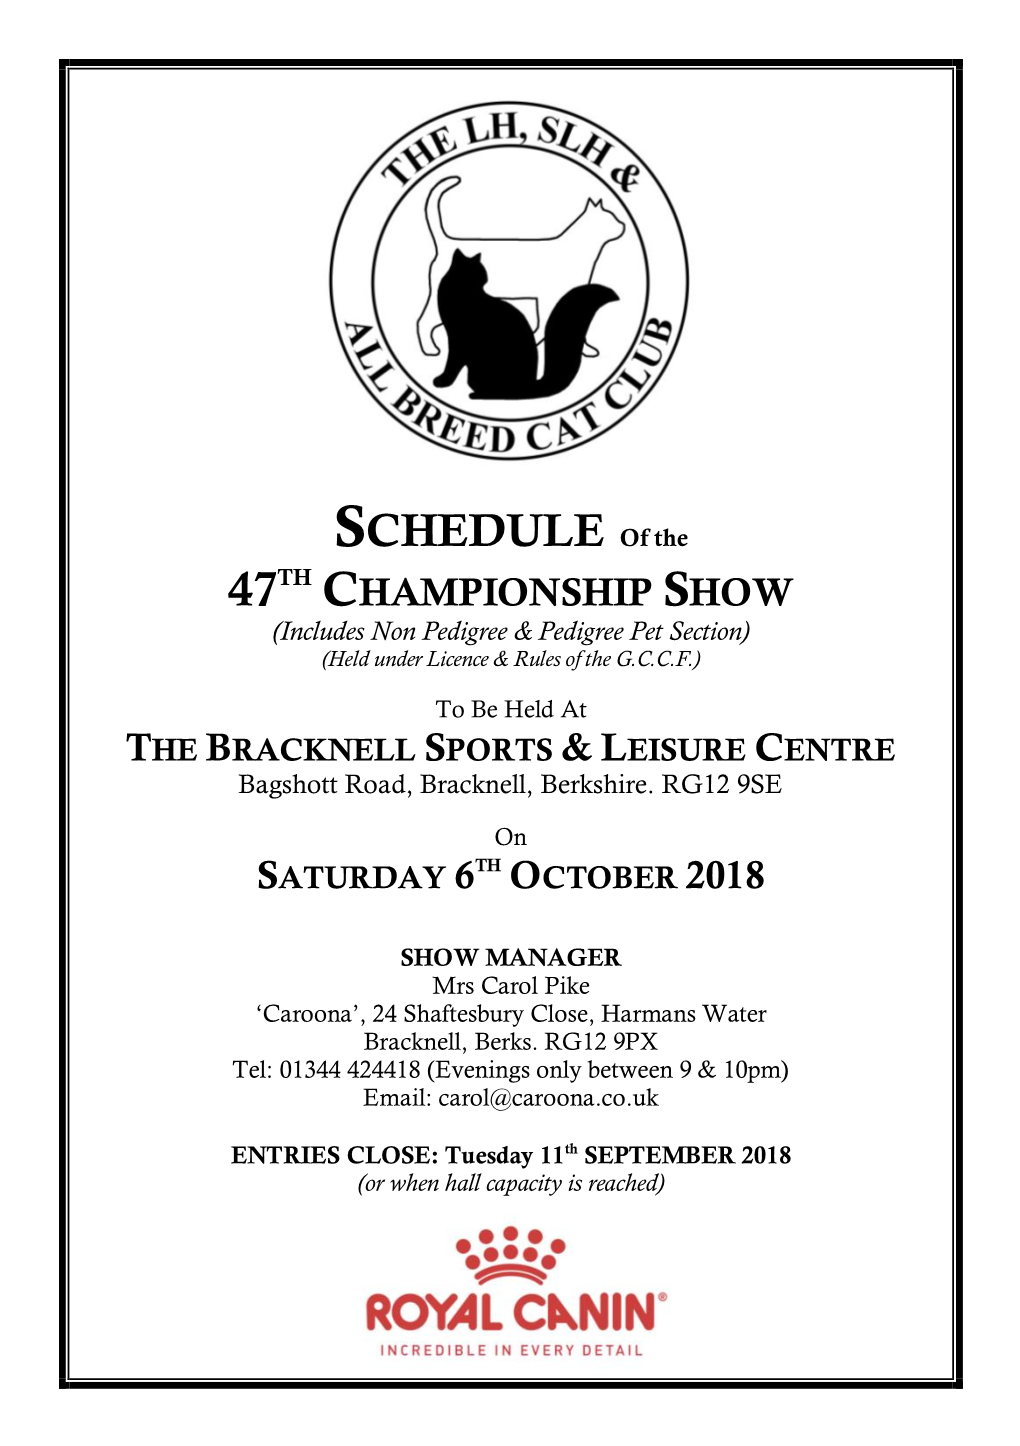 SCHEDULE of the 47TH CHAMPIONSHIP SHOW (Includes Non Pedigree & Pedigree Pet Section) (Held Under Licence & Rules of the G.C.C.F.)